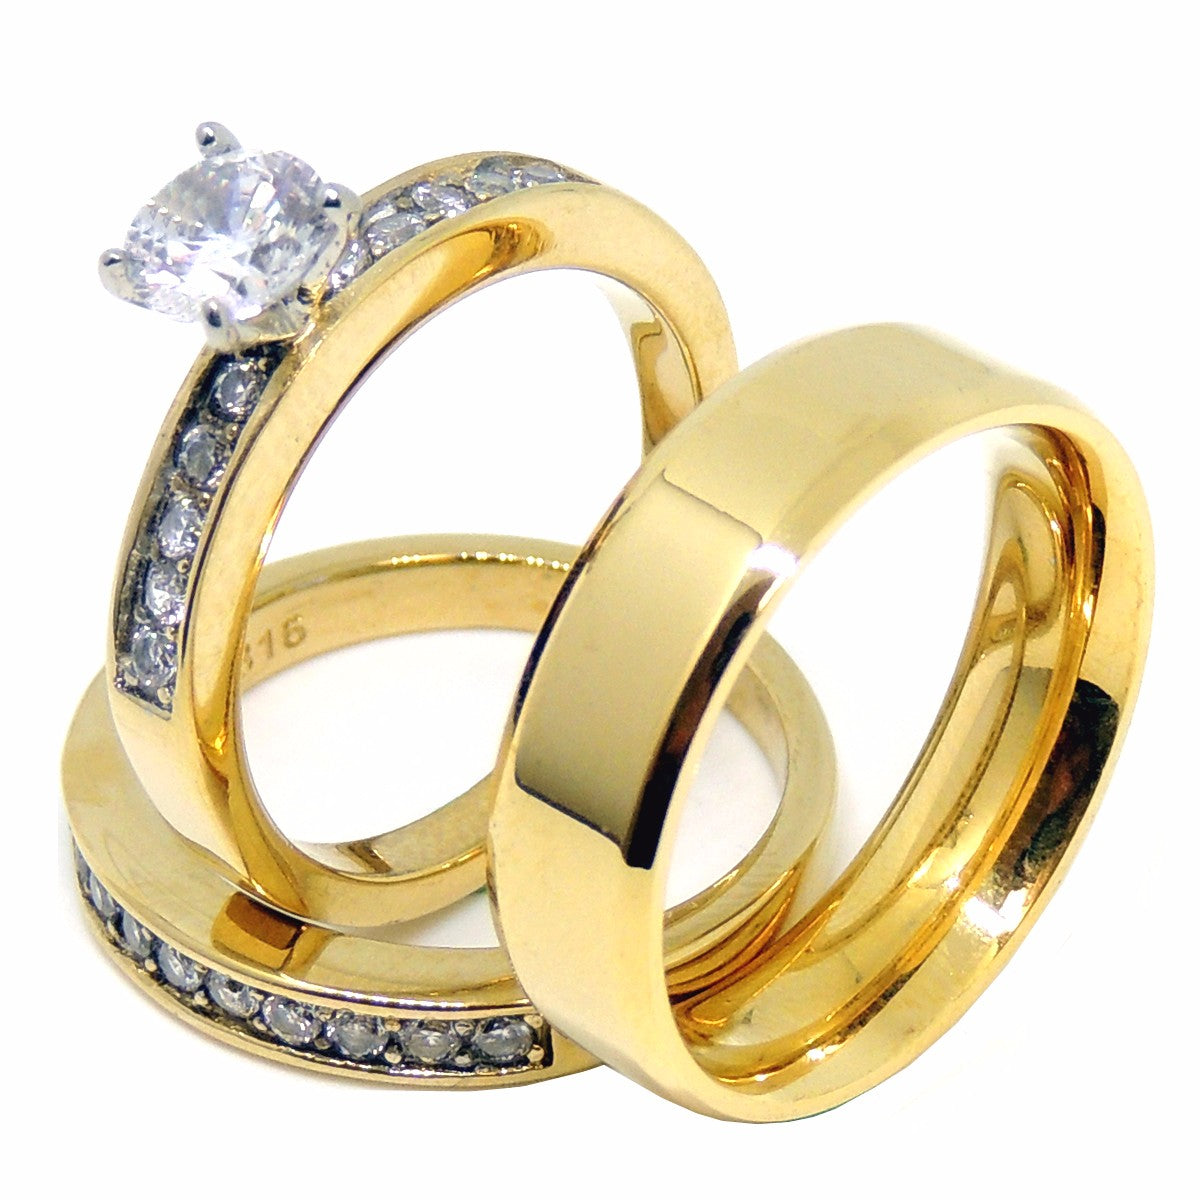 Couples Ring Set Womens Gold Plated 6mm Round CZ Ring Set Mens Gold Plated Flat Wedding Band - LA NY Jewelry